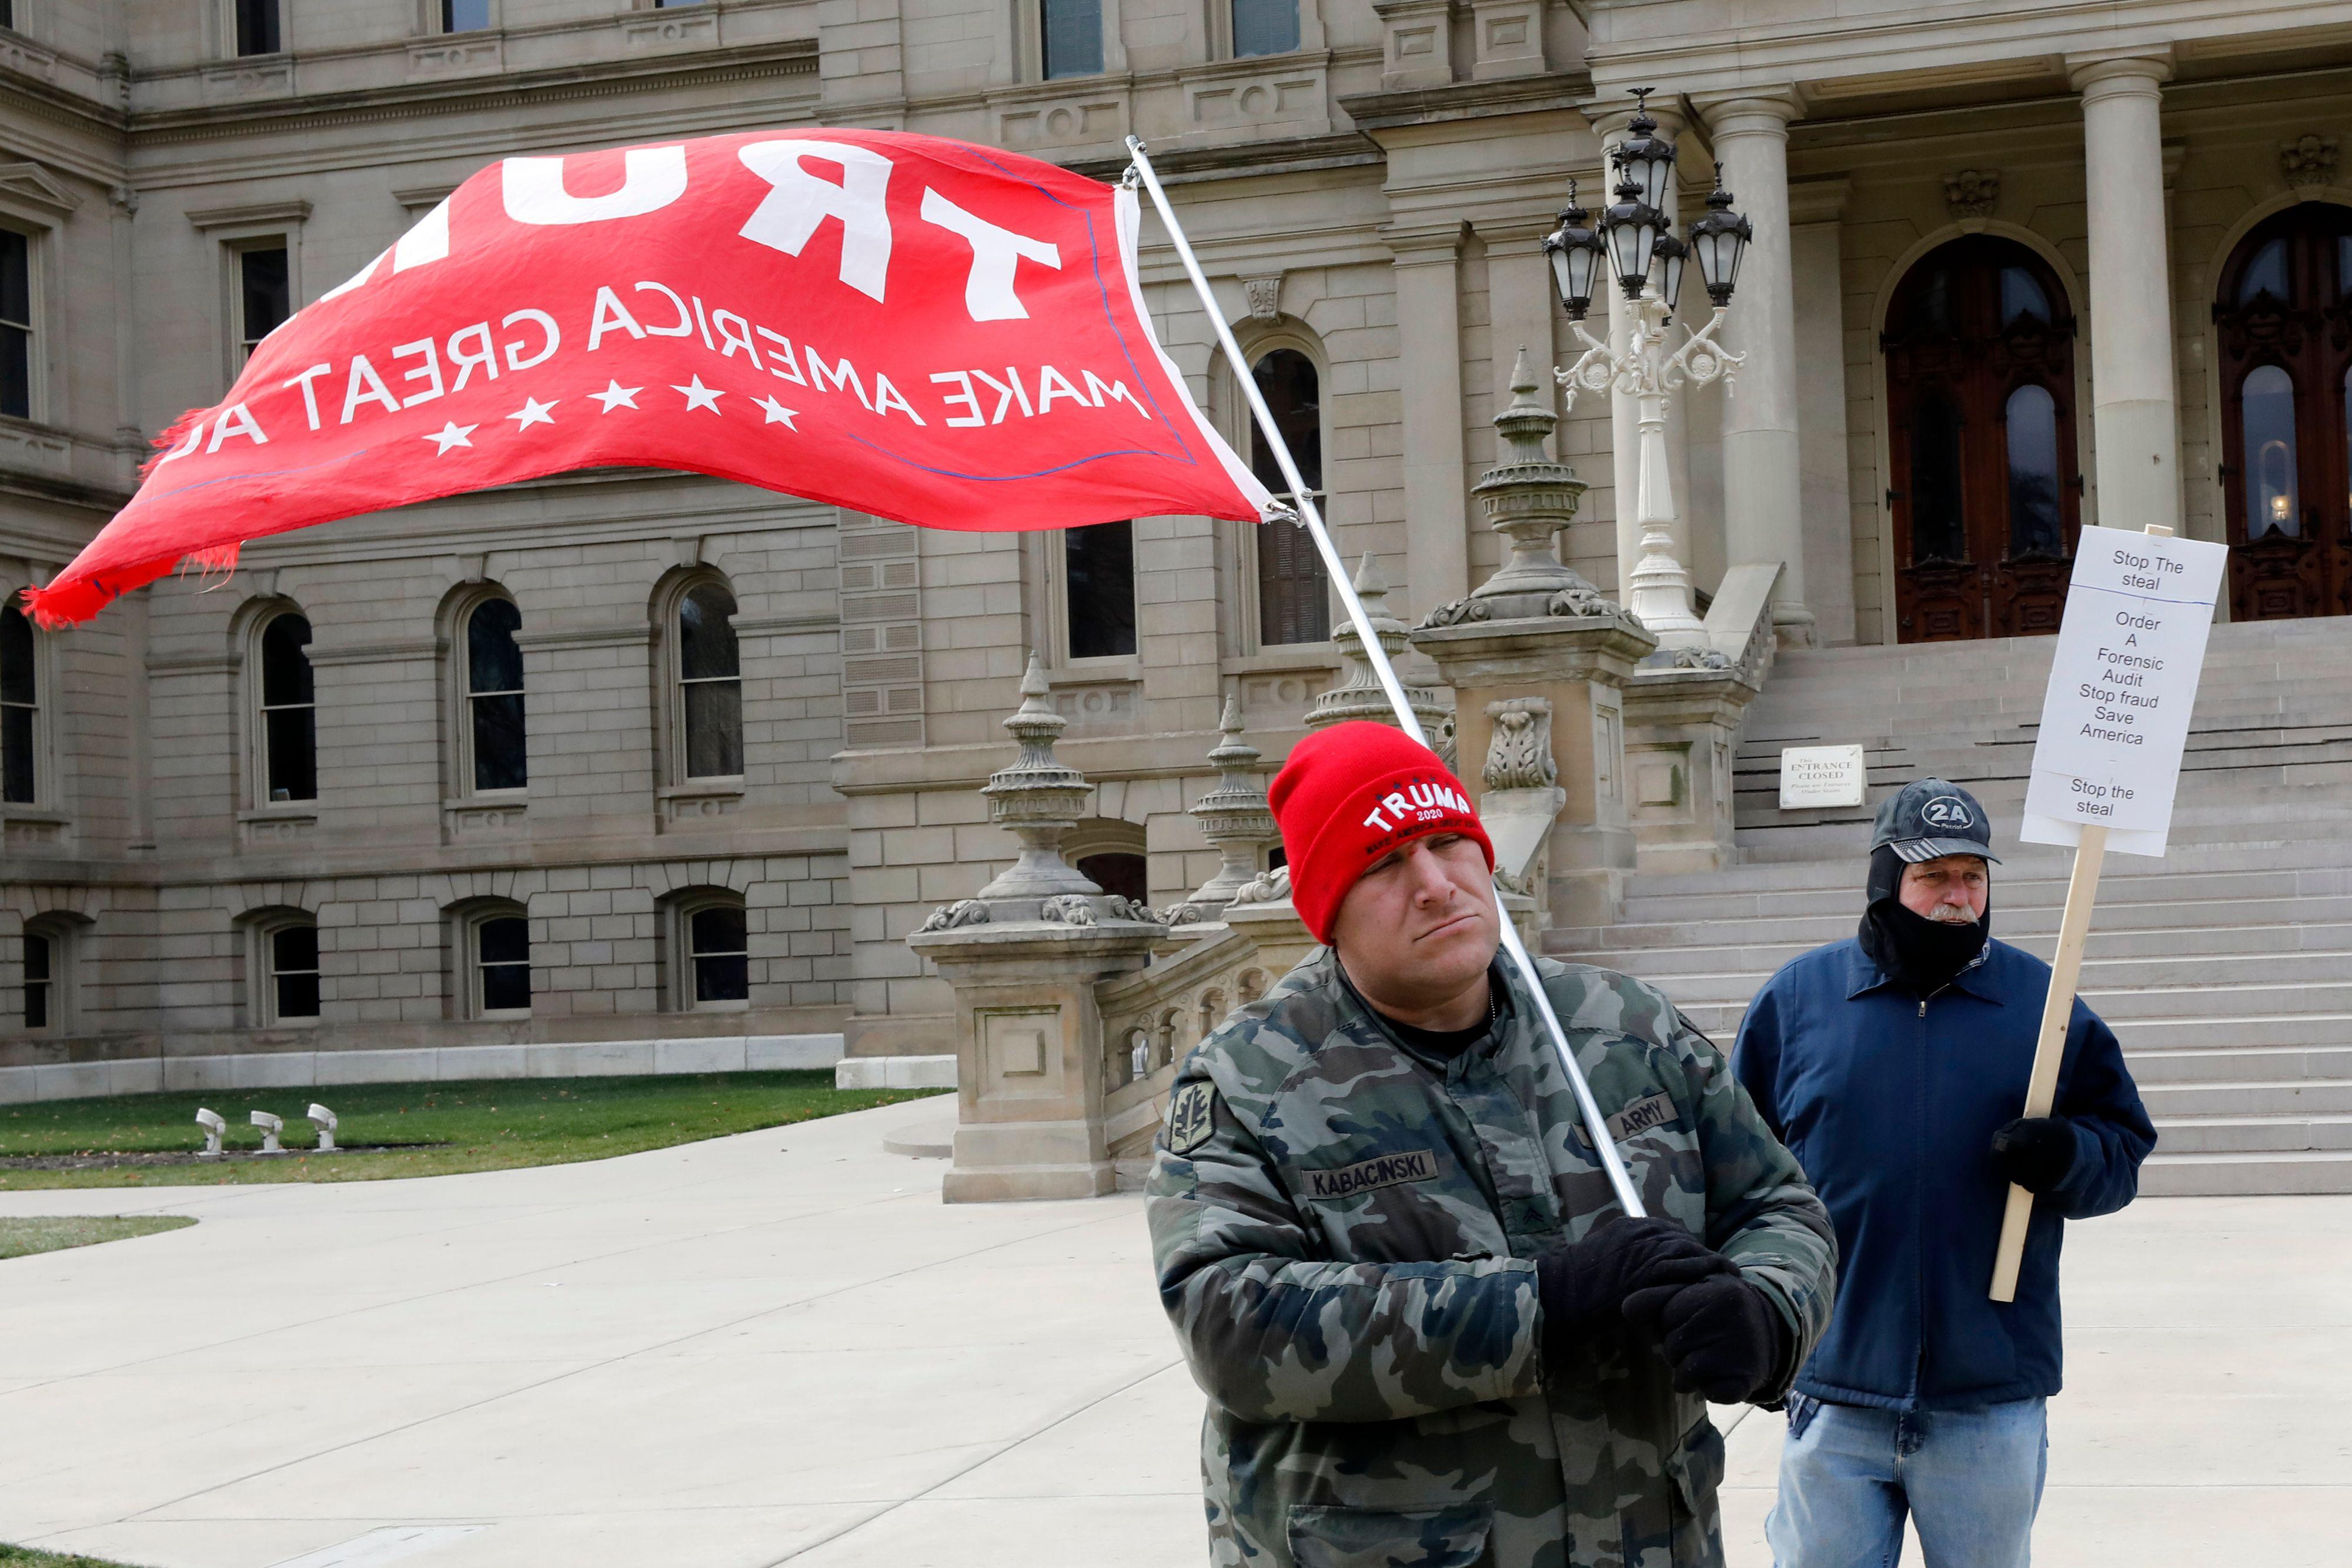 One man in a red Trump beanie carries a large red Trump flag and another man holds a Stop the Steal sign in front of the Capitol steps